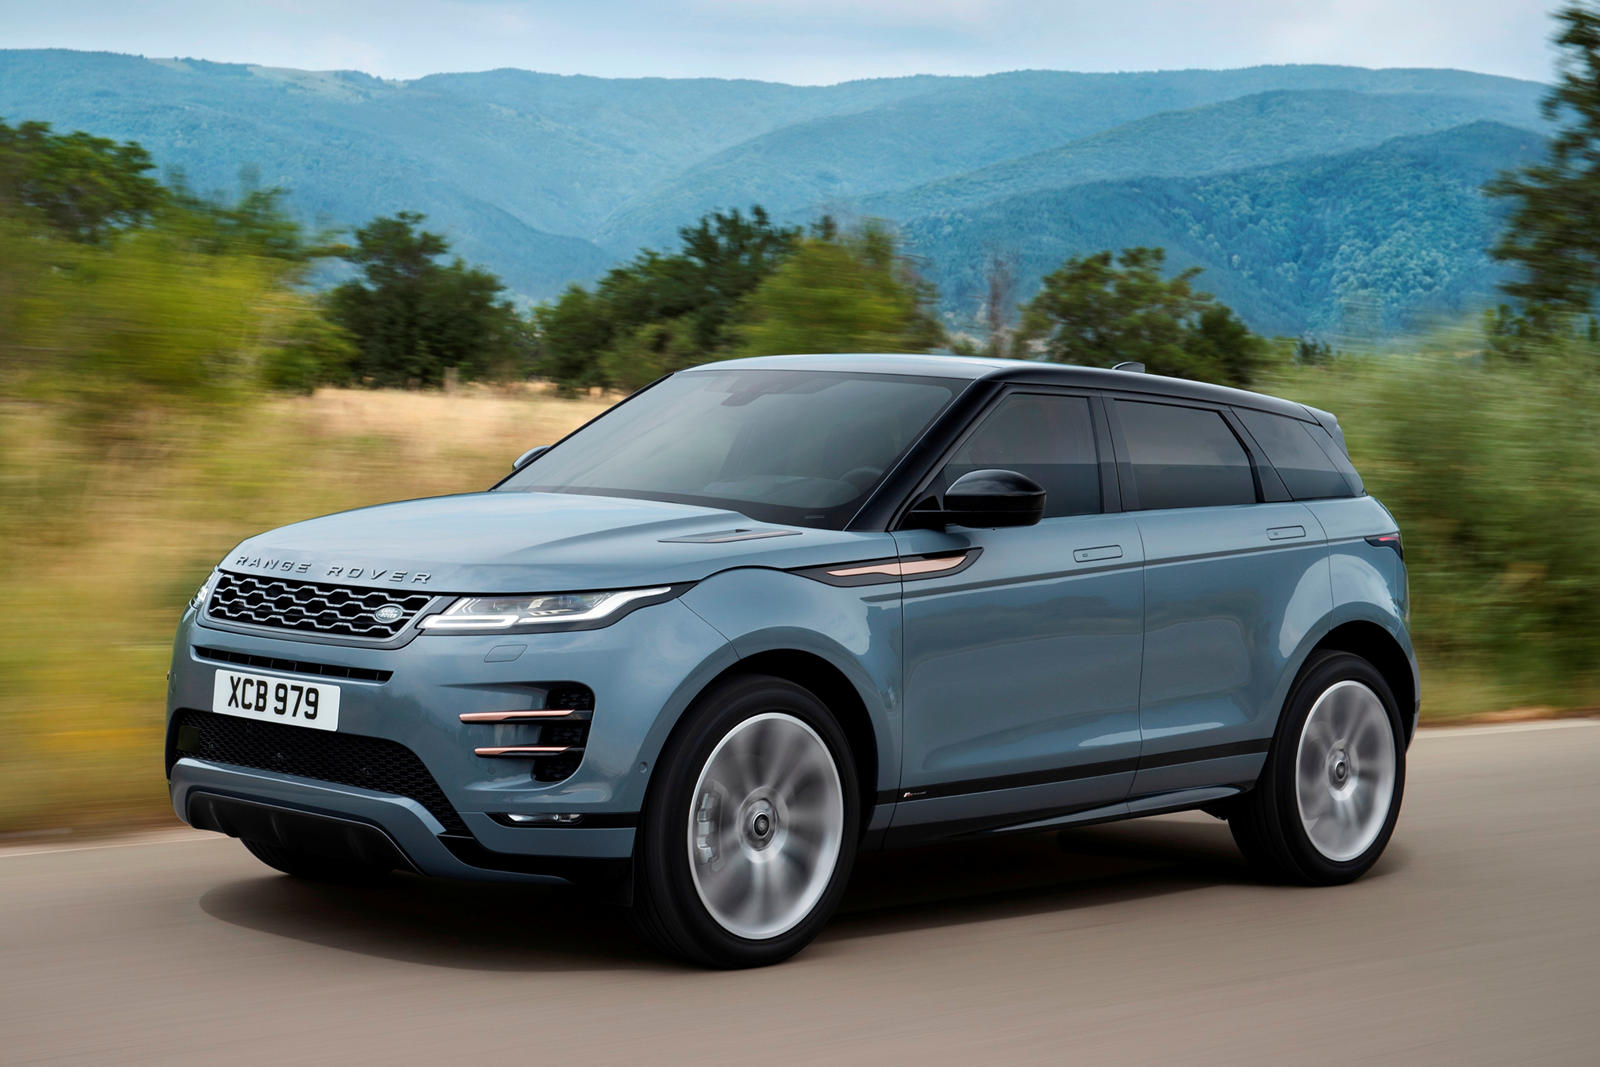 Used Land Rover Range Rover Evoque With a I4 (Inline-4) engine for Sale ...